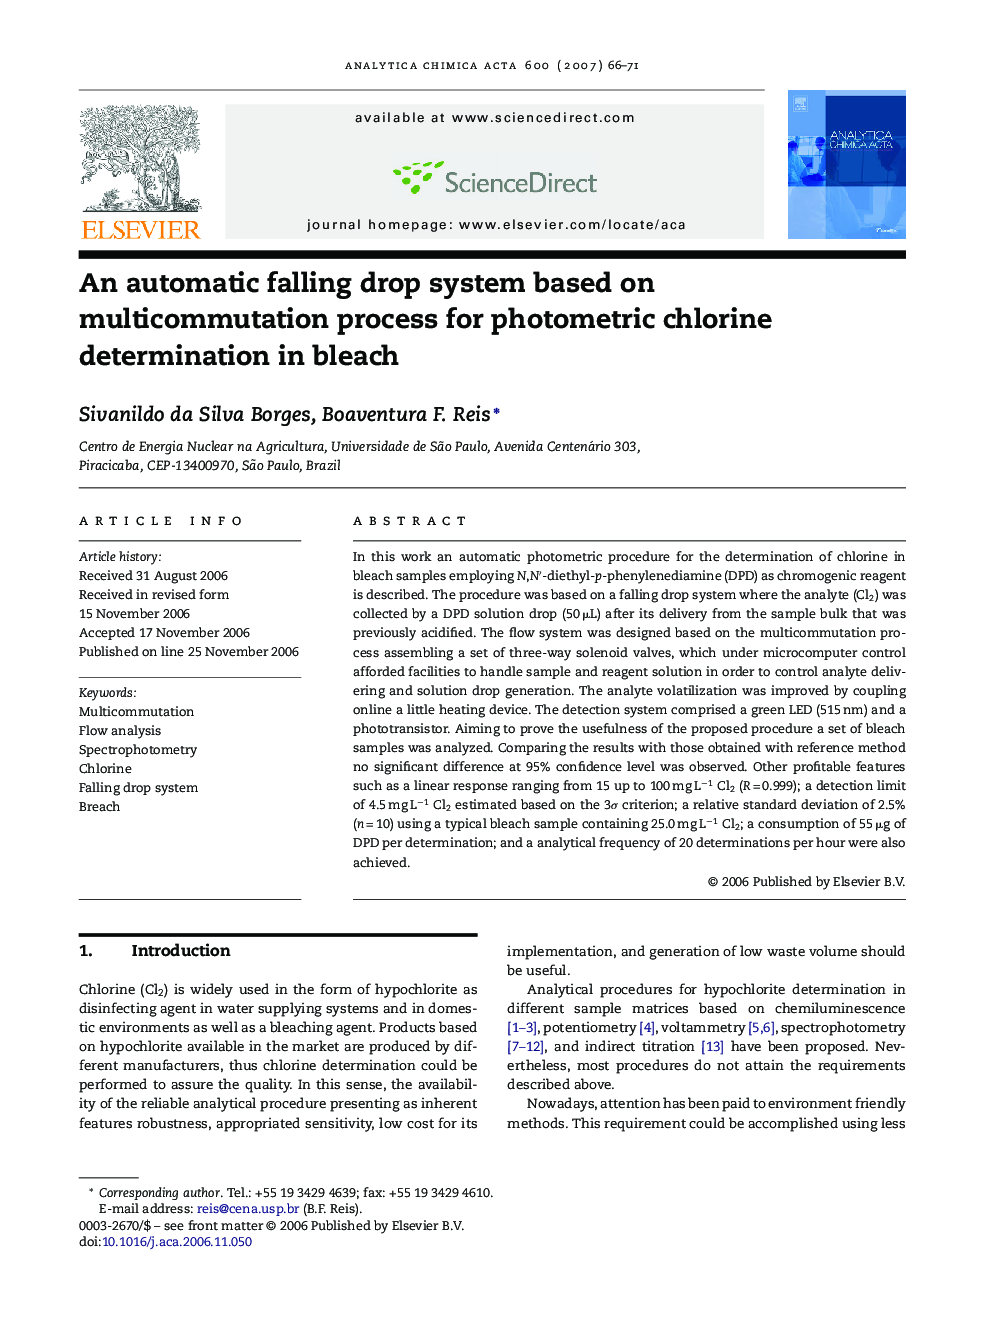 An automatic falling drop system based on multicommutation process for photometric chlorine determination in bleach